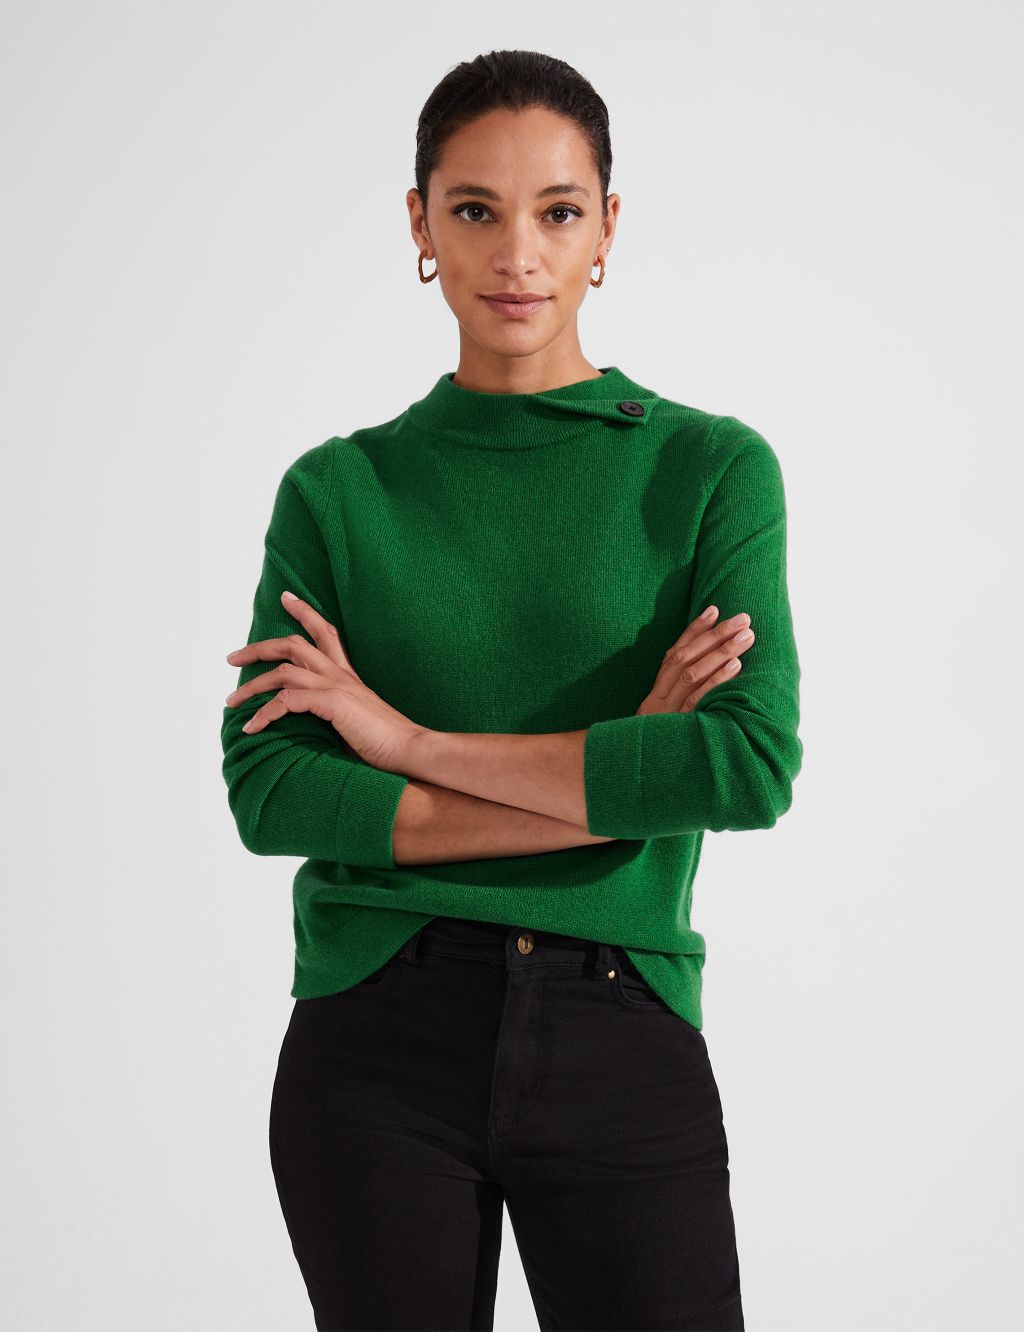 Wool Rich Crew Neck Jumper with Cashmere image 1